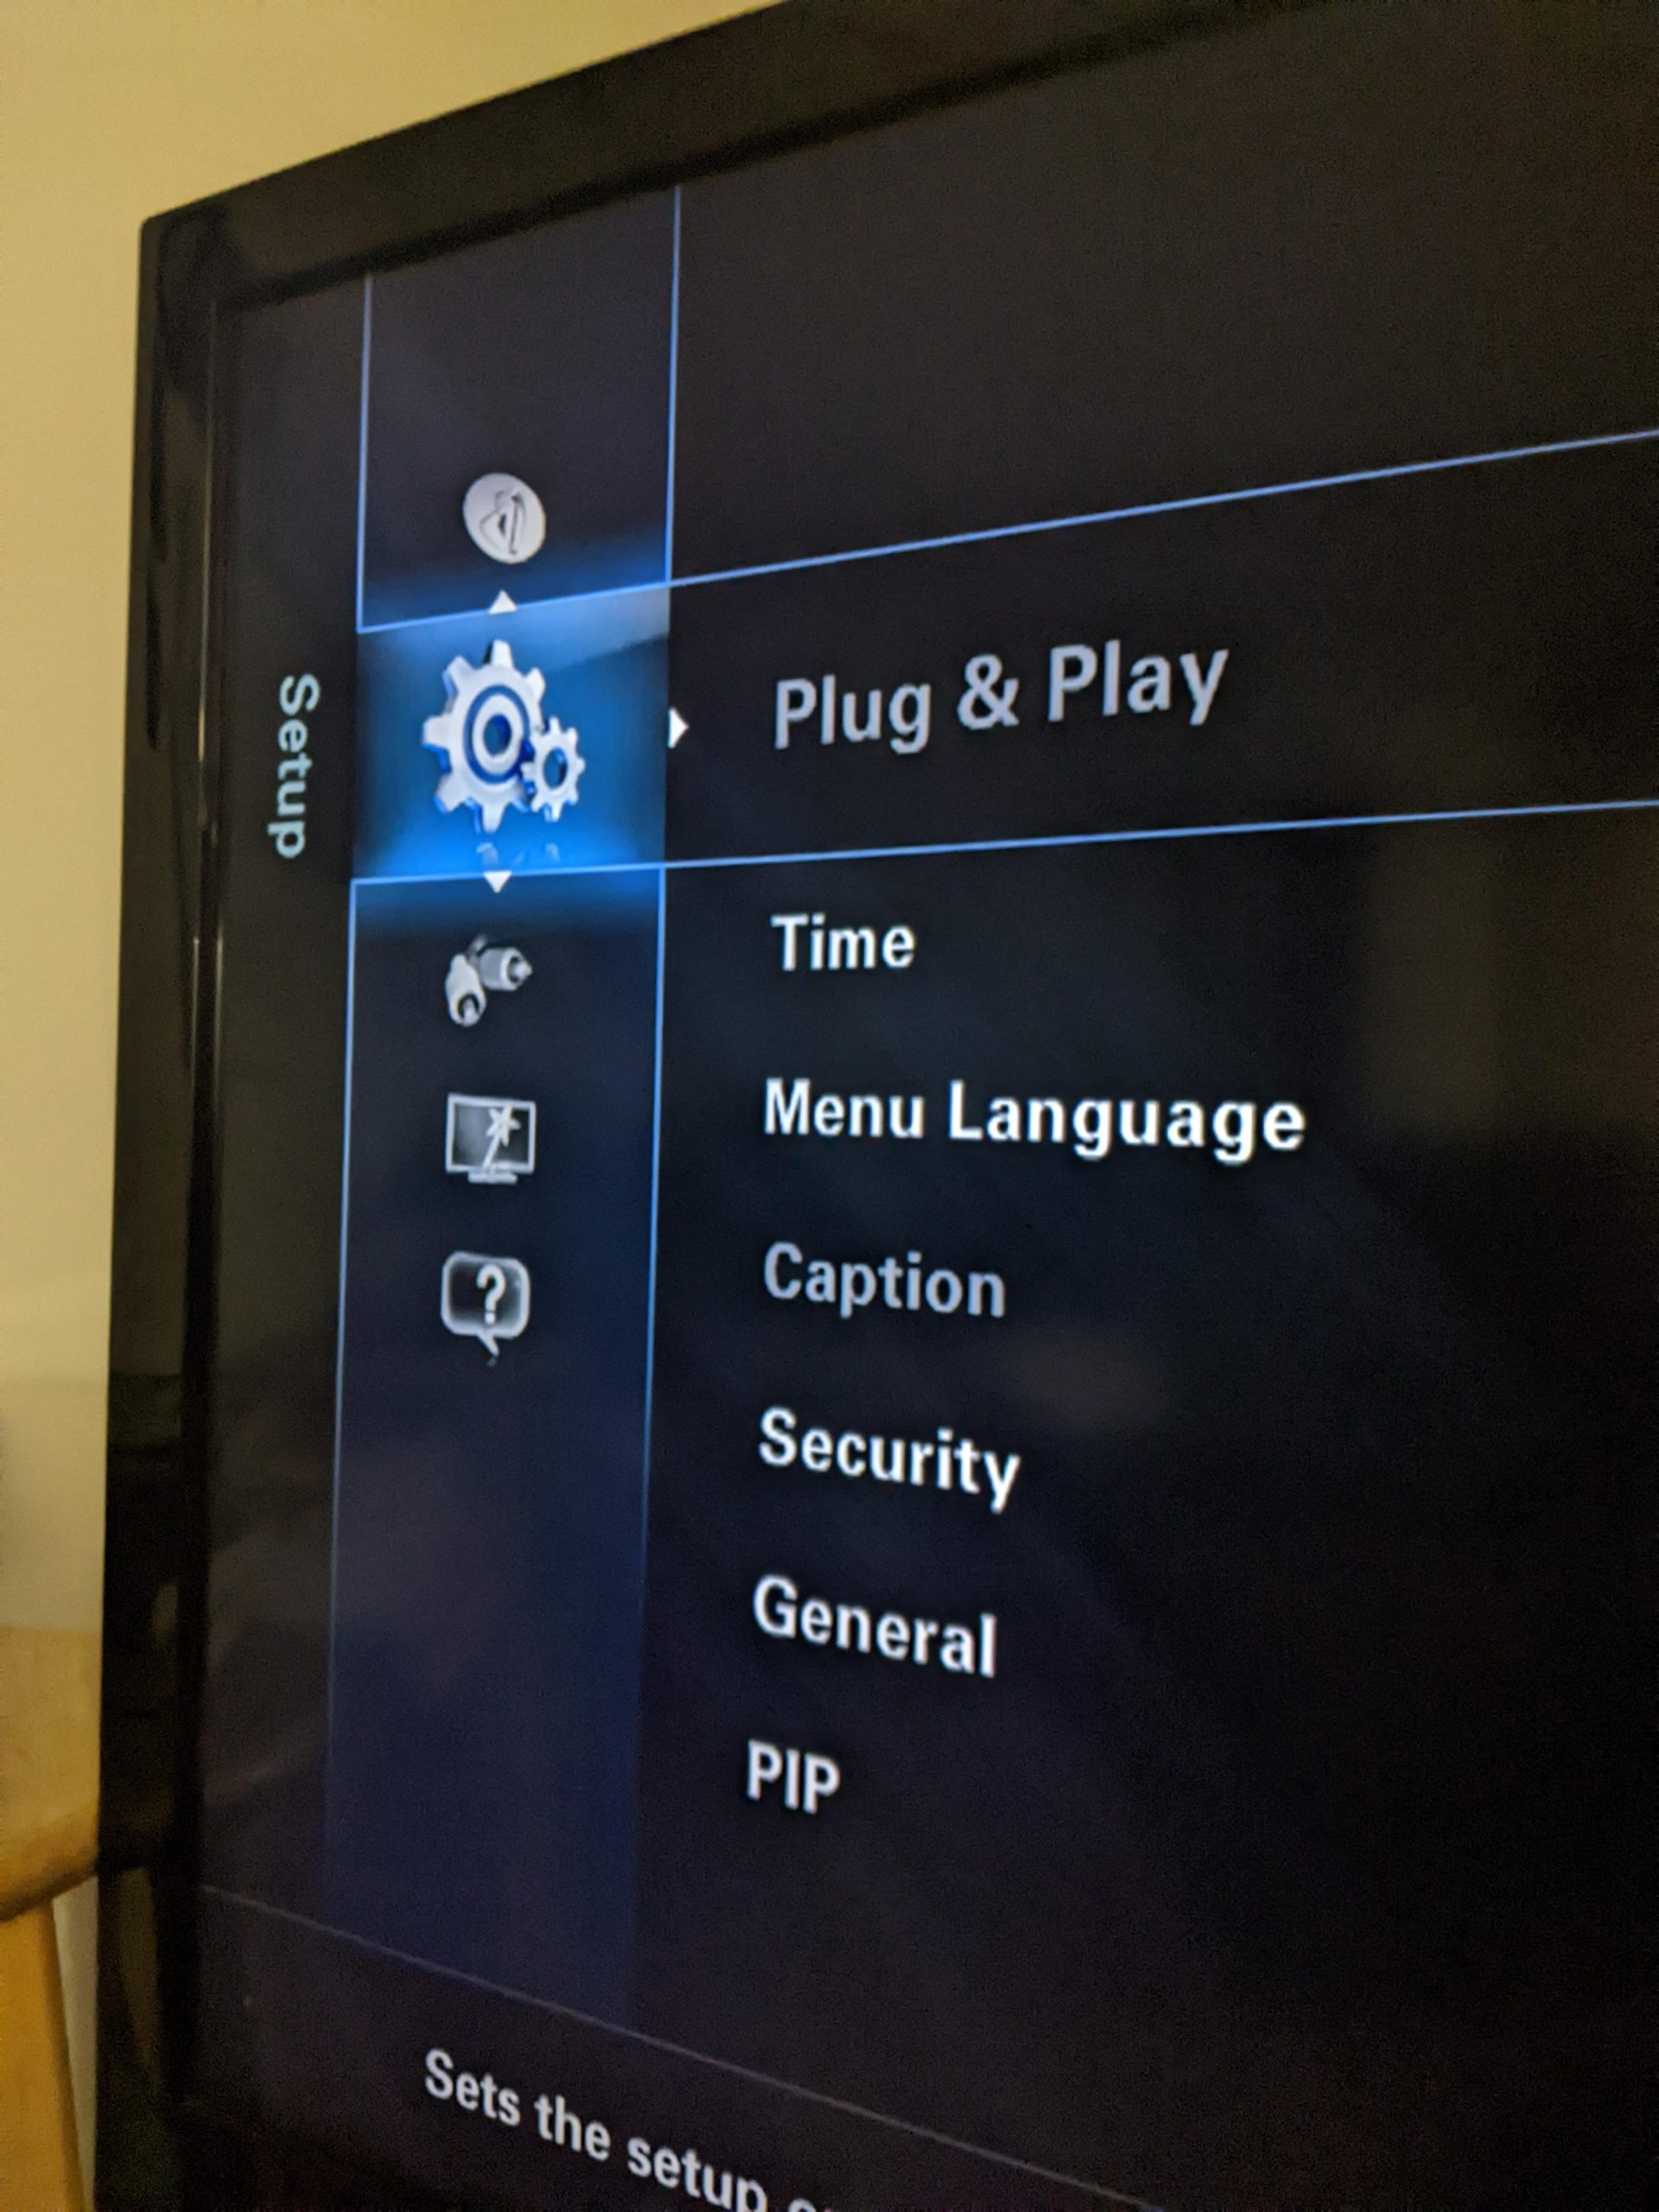 How to Remove Banner from Samsung Tv Series 5 Without Remote